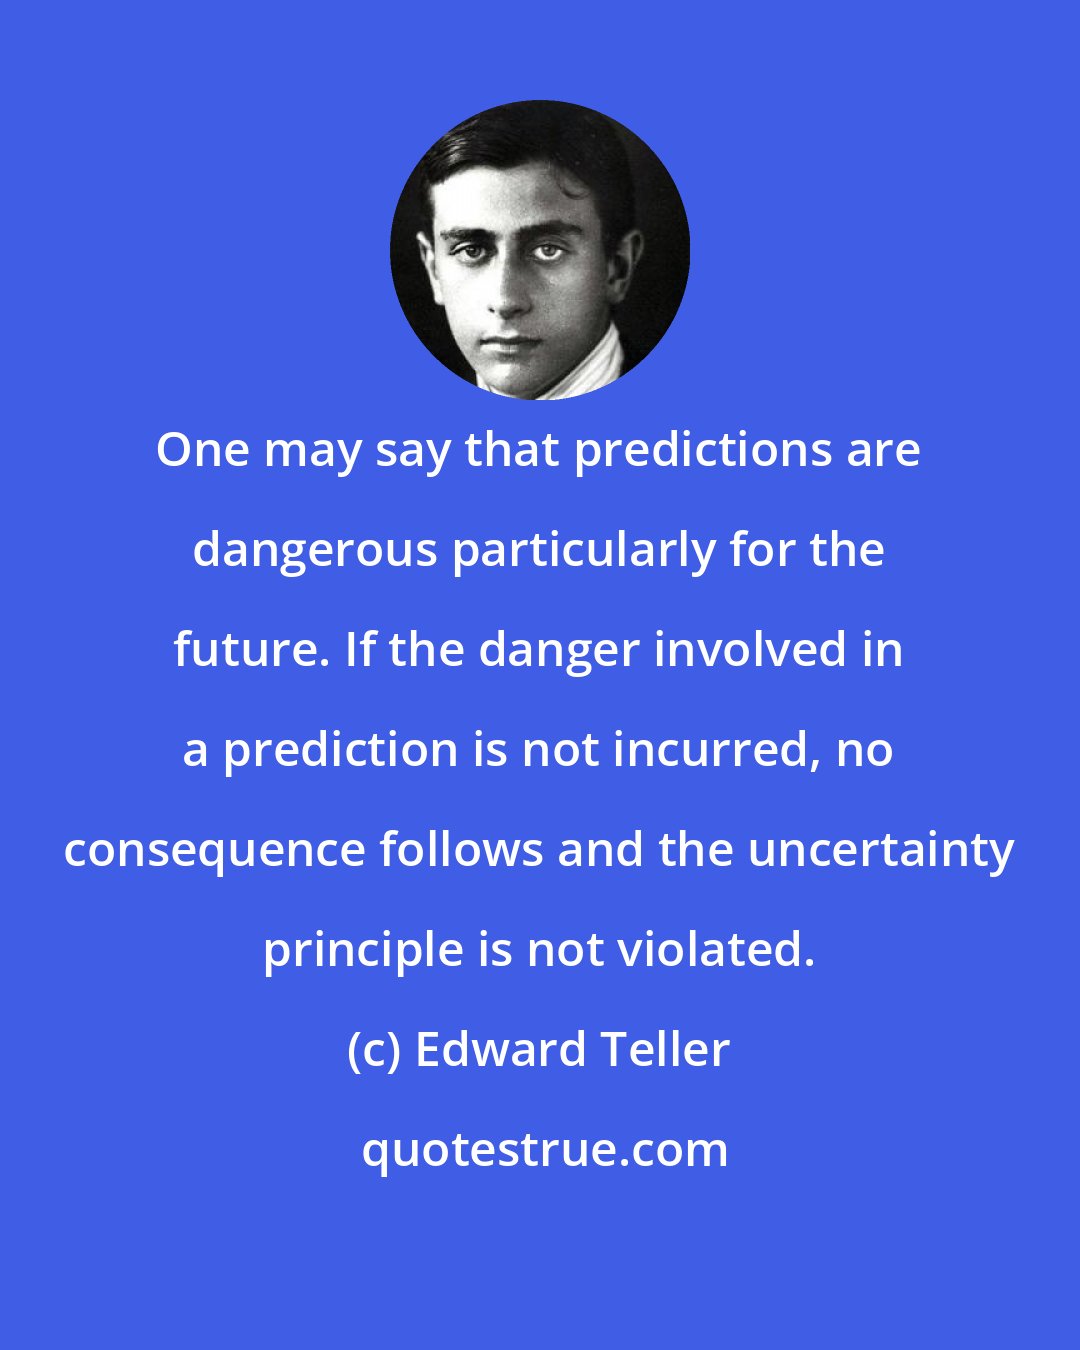 Edward Teller: One may say that predictions are dangerous particularly for the future. If the danger involved in a prediction is not incurred, no consequence follows and the uncertainty principle is not violated.